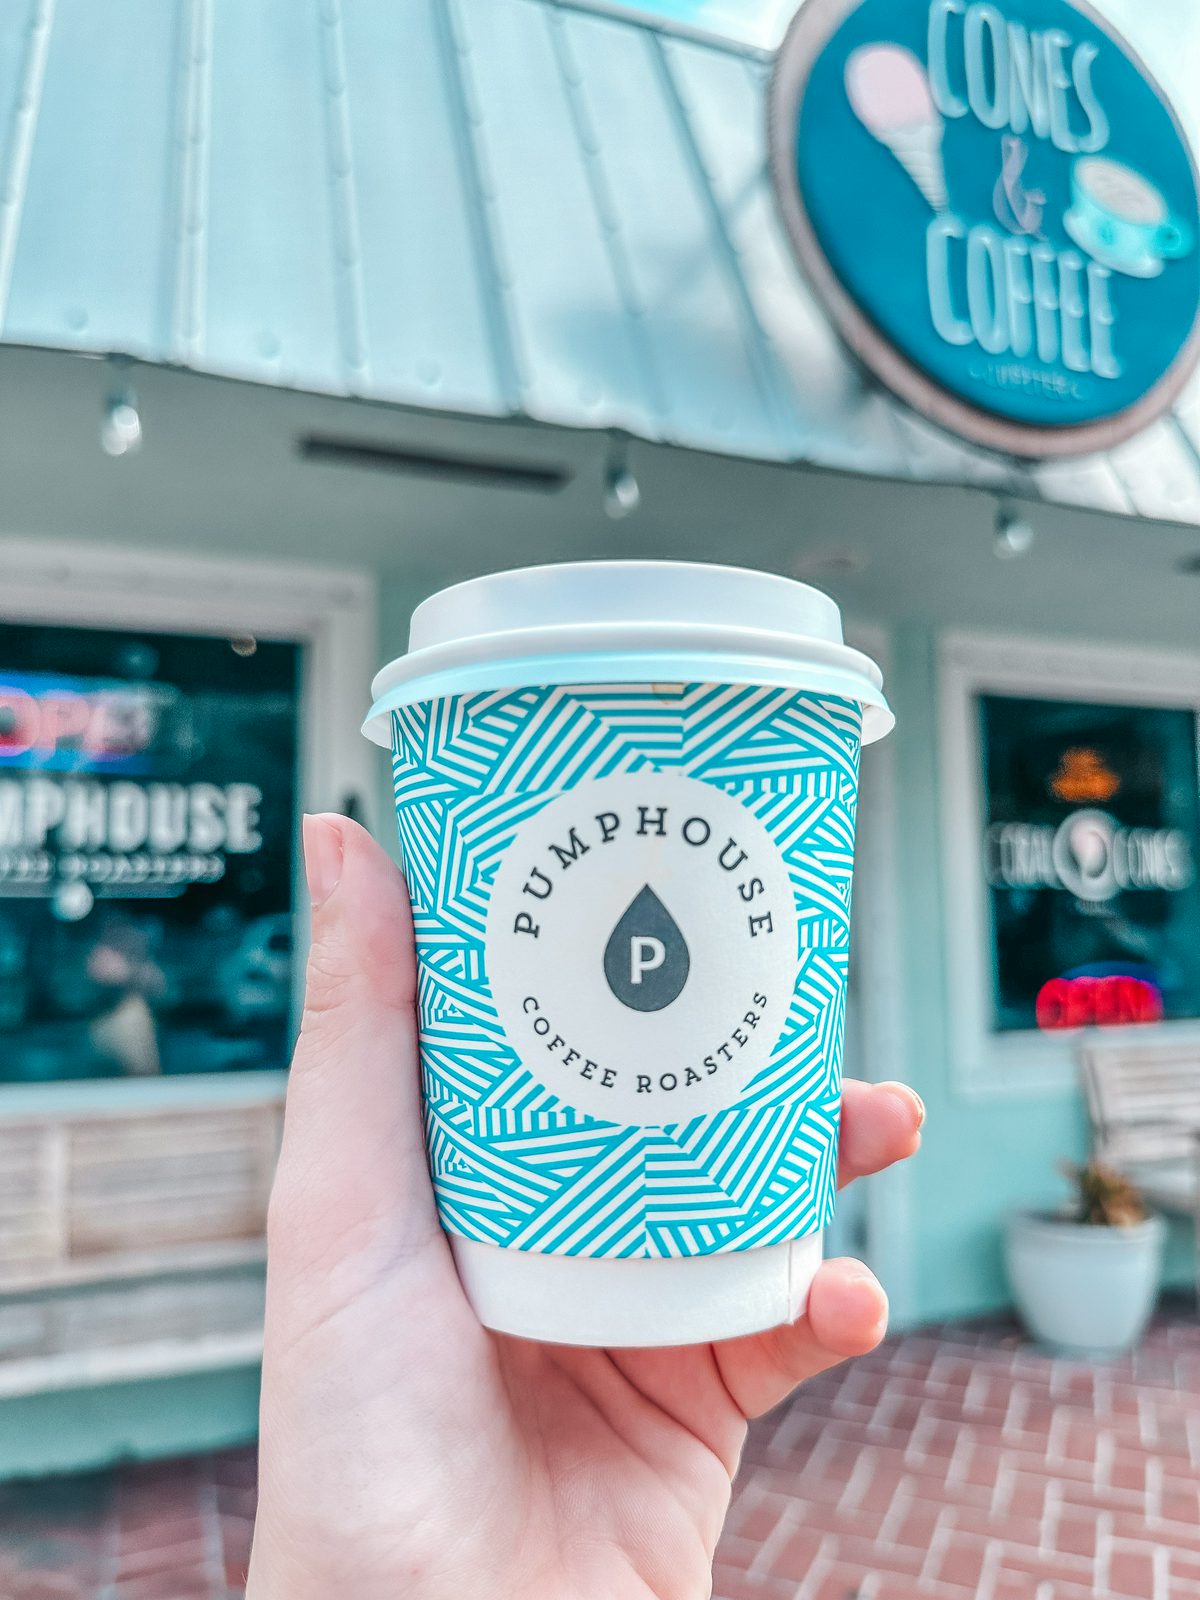 Pumphouse coffee from Cones and Coffee in Jupiter